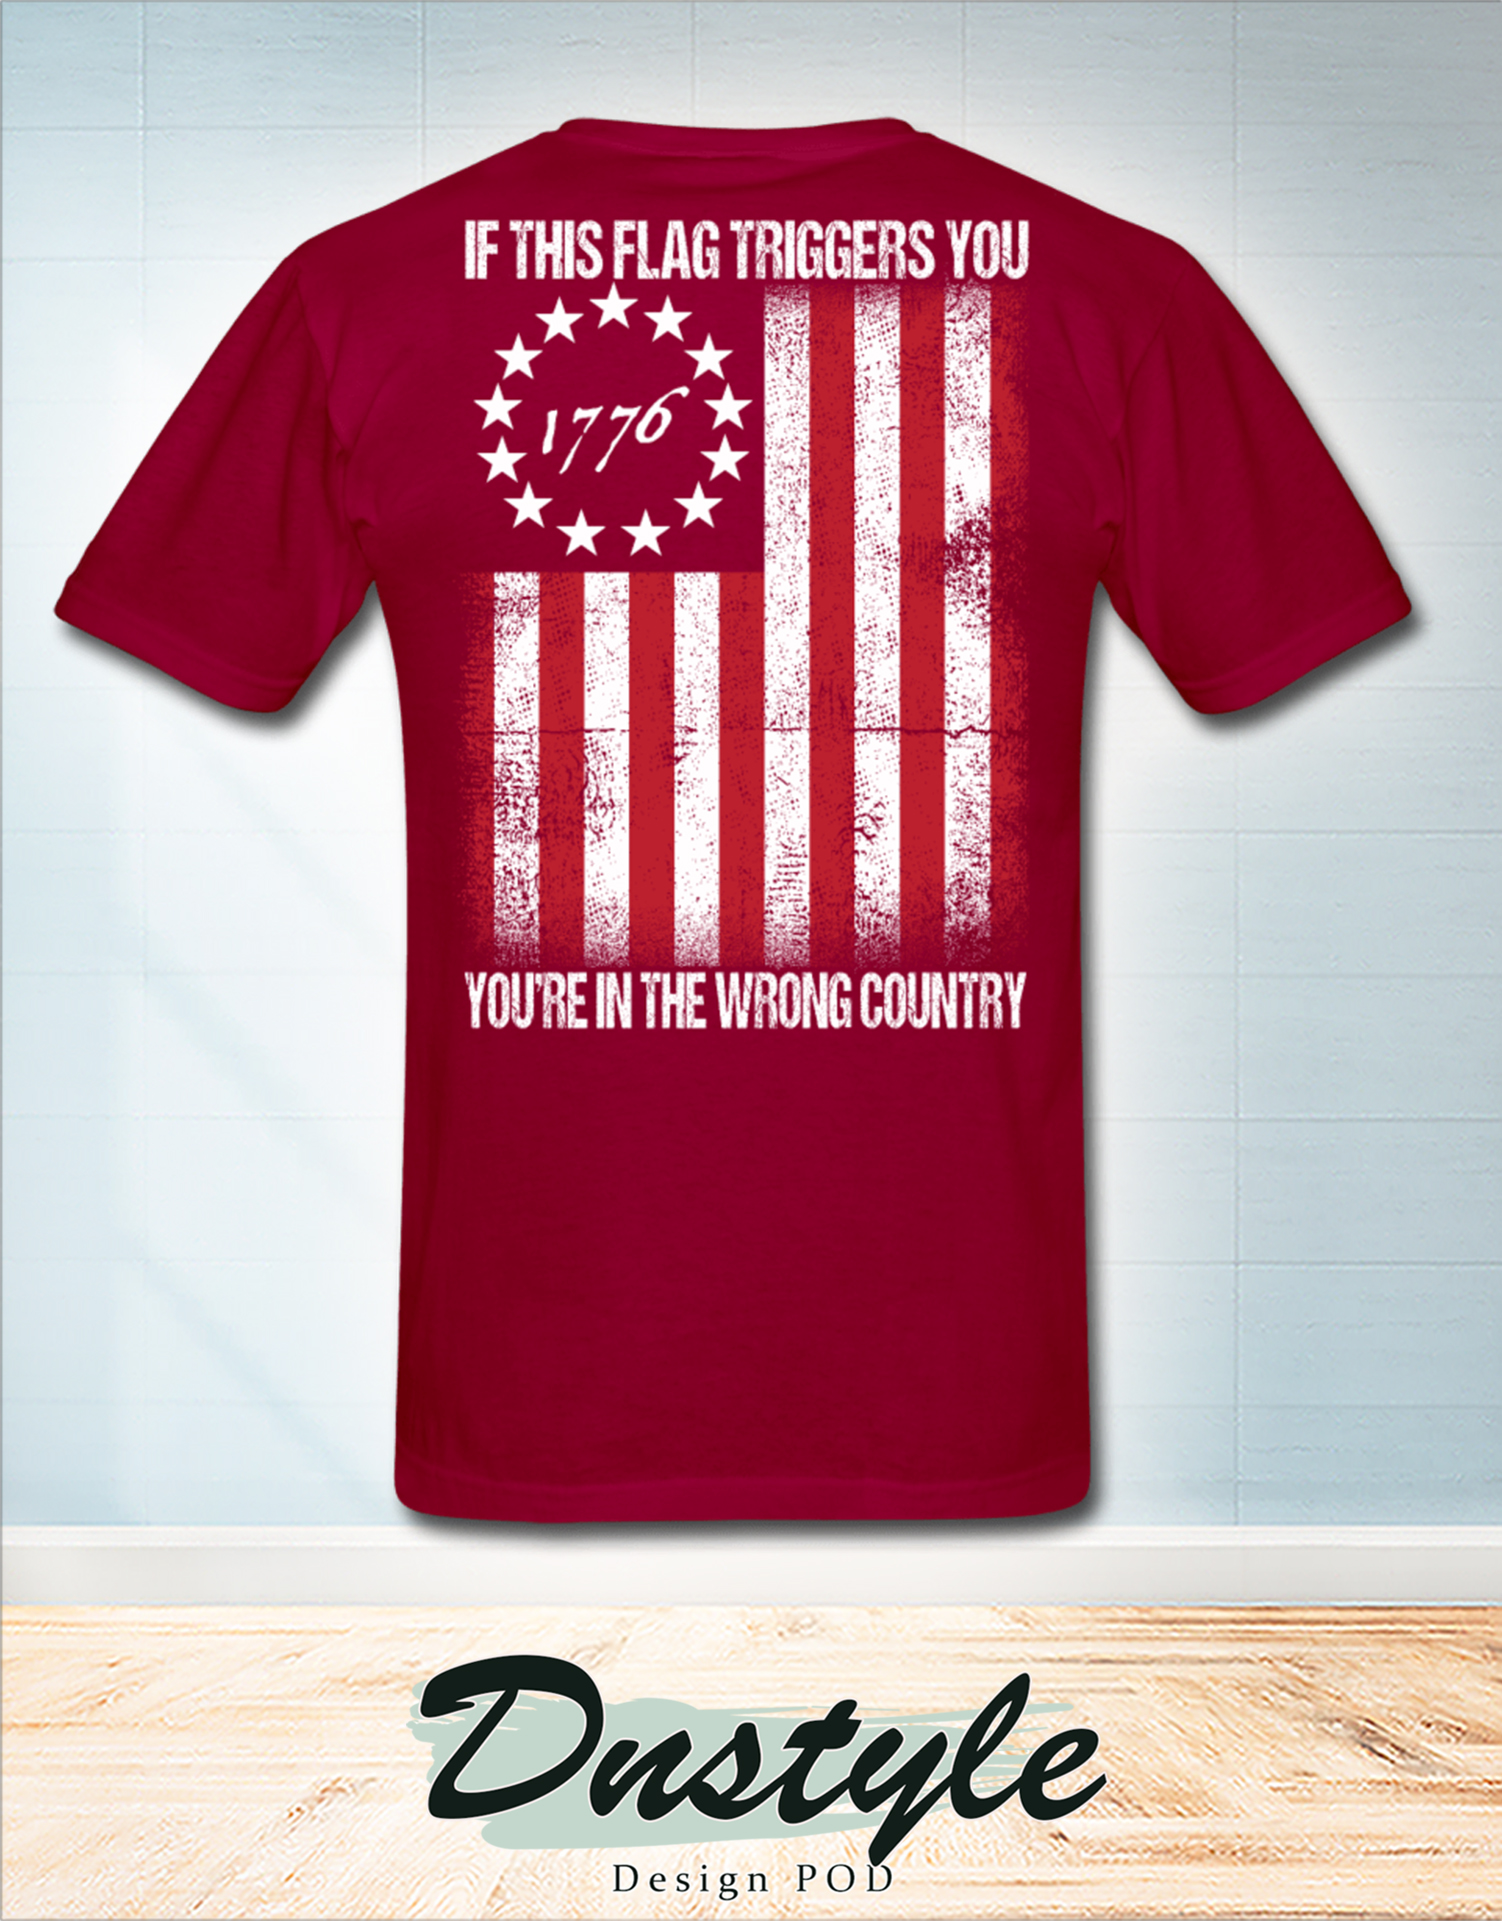 1776 if this flag trigged you you're in the wrong country american flag t-shirt 1